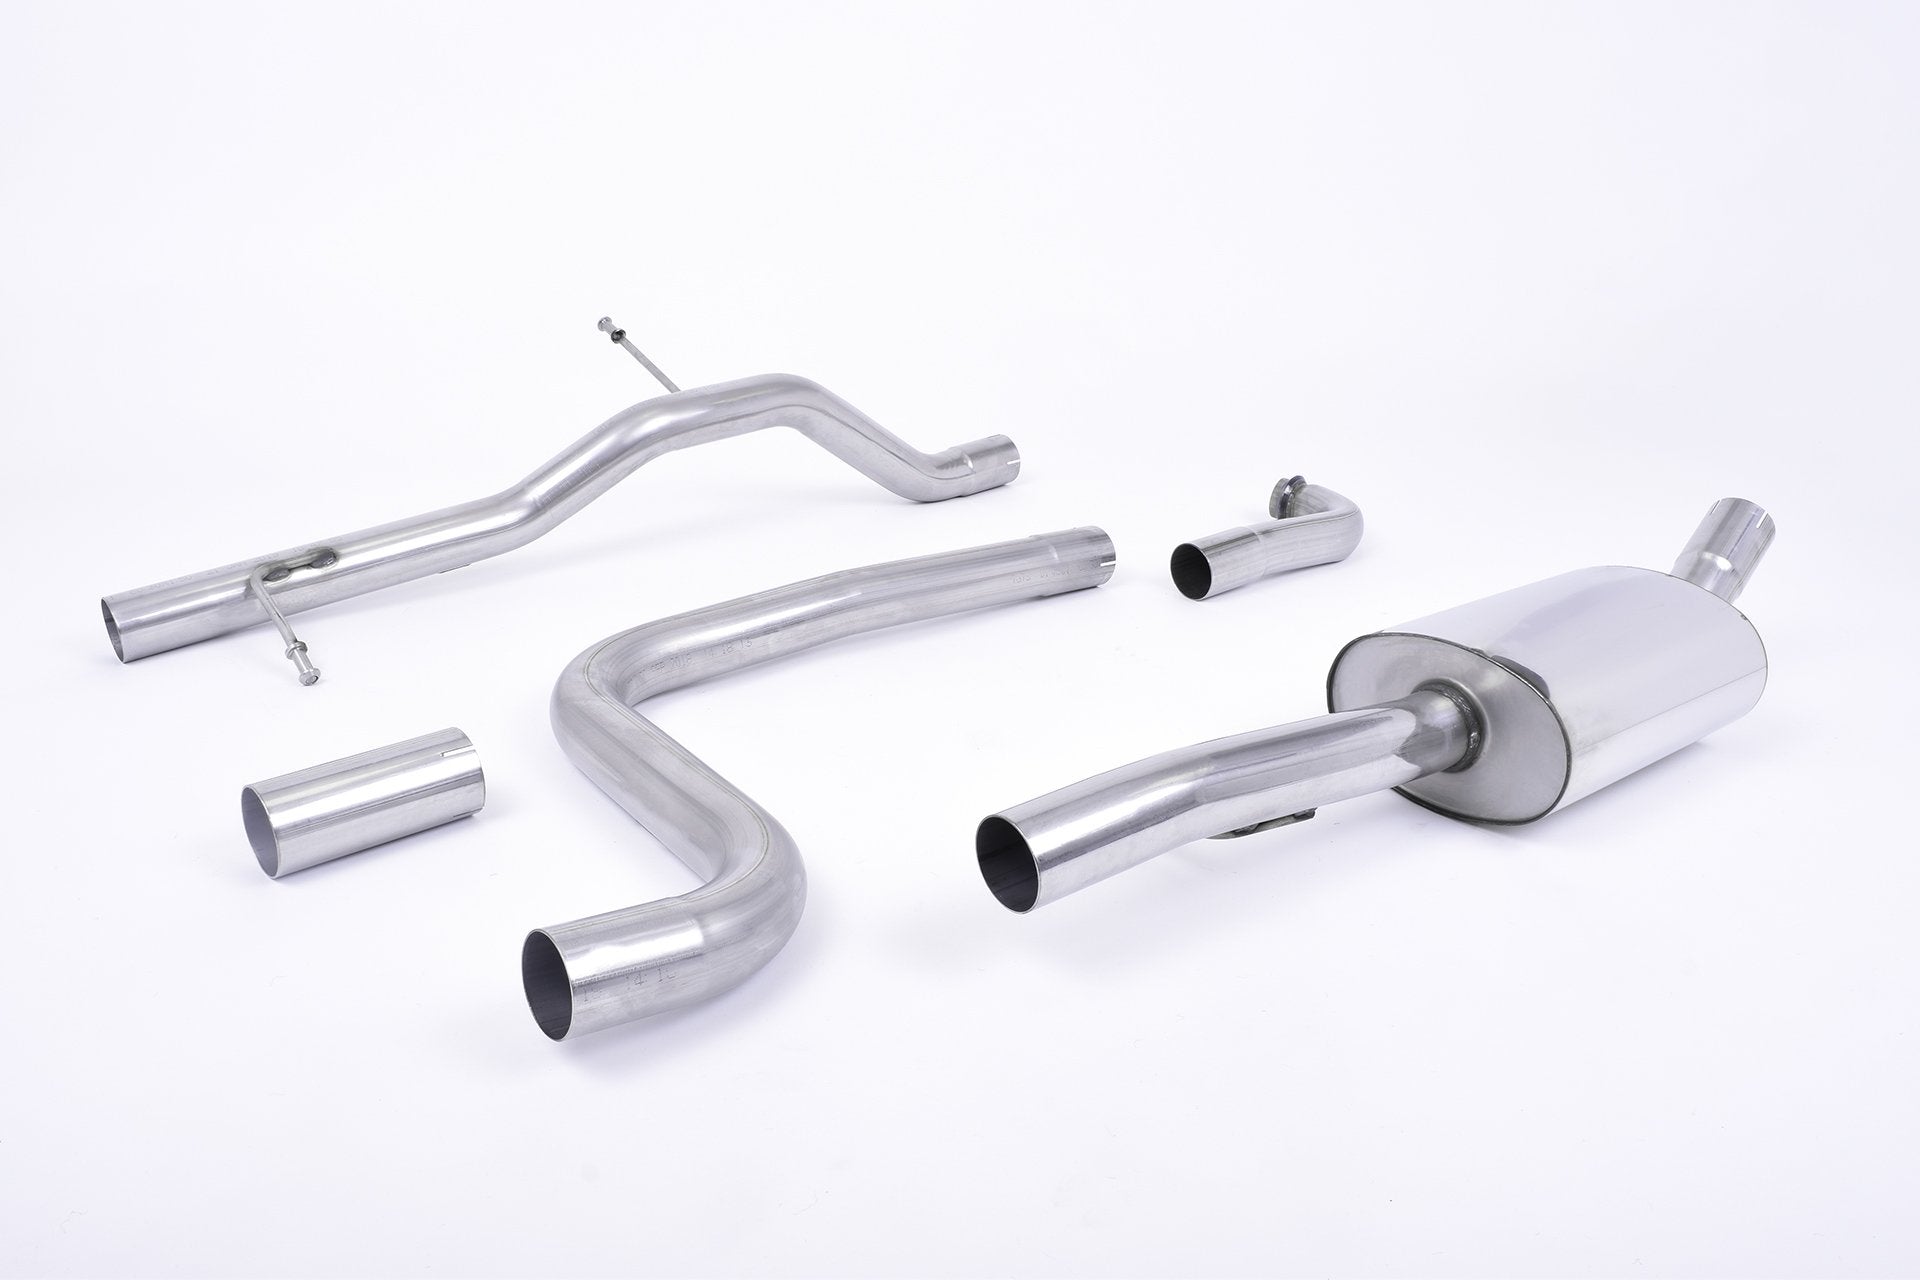 Milltek Non Resonated Catback Exhaust for MK8 Fiesta 1.0 with Polished Tips